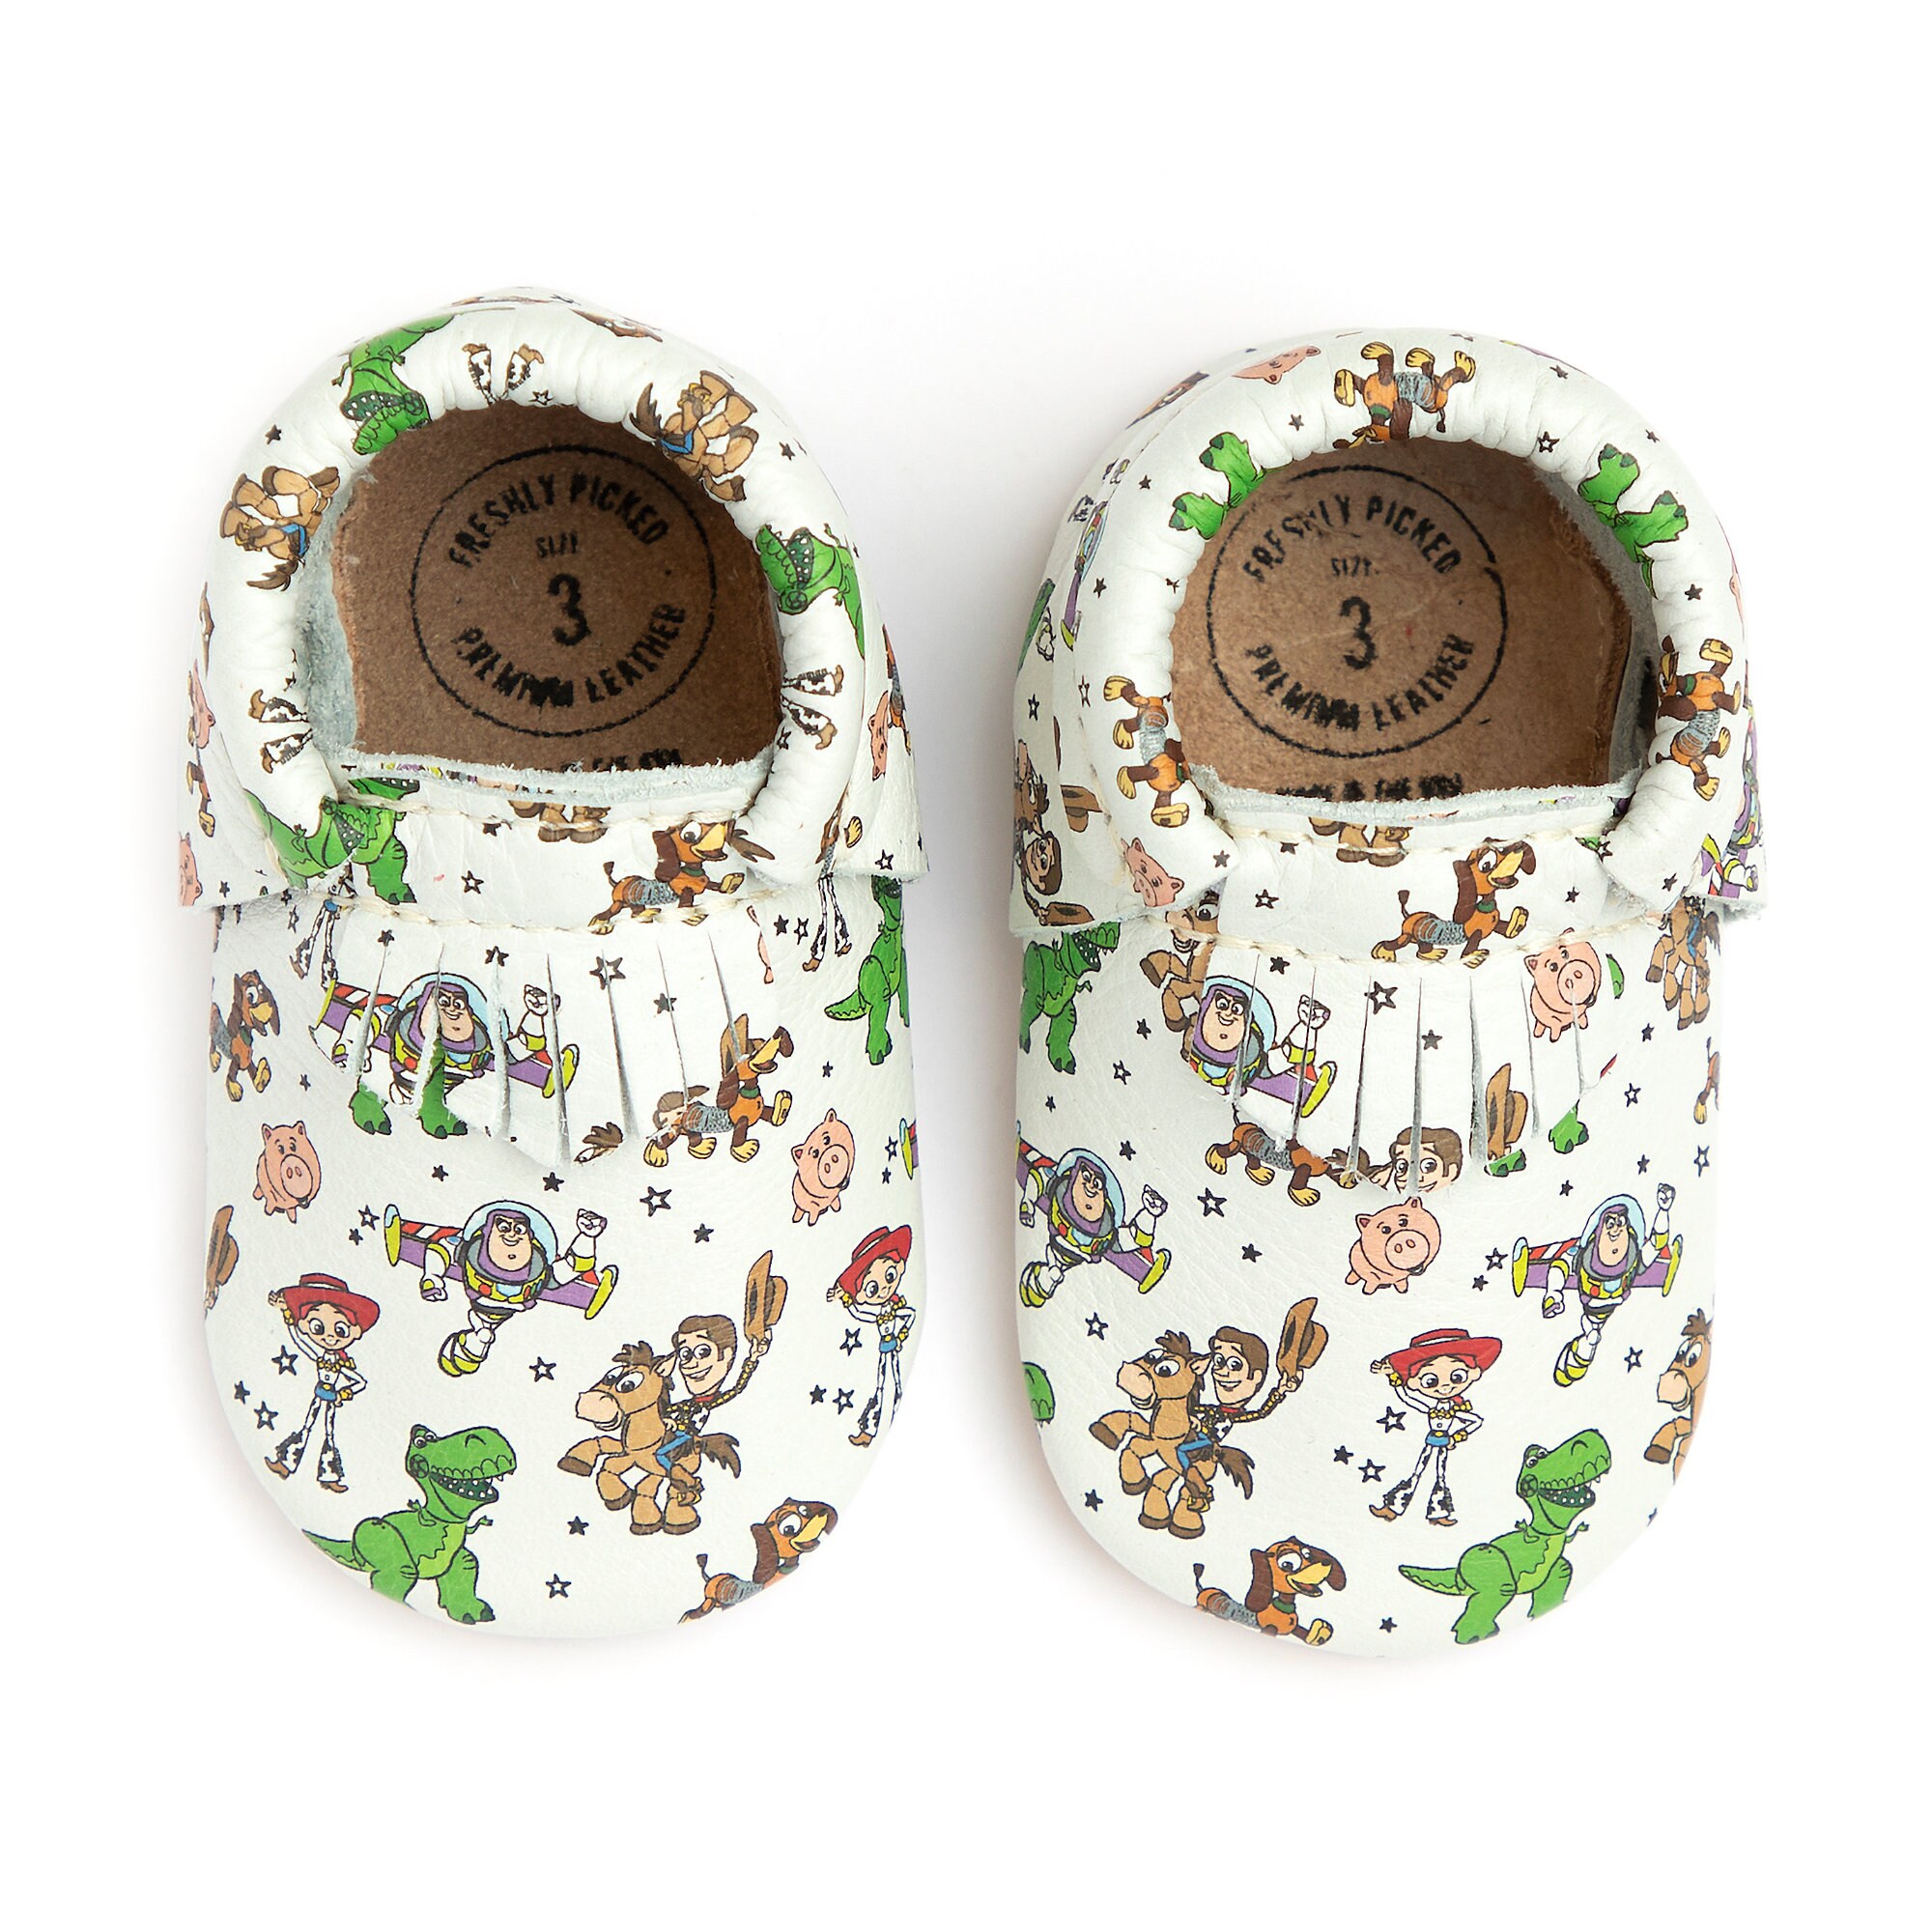 Toy Story Moccasins for Baby by Freshly Picked